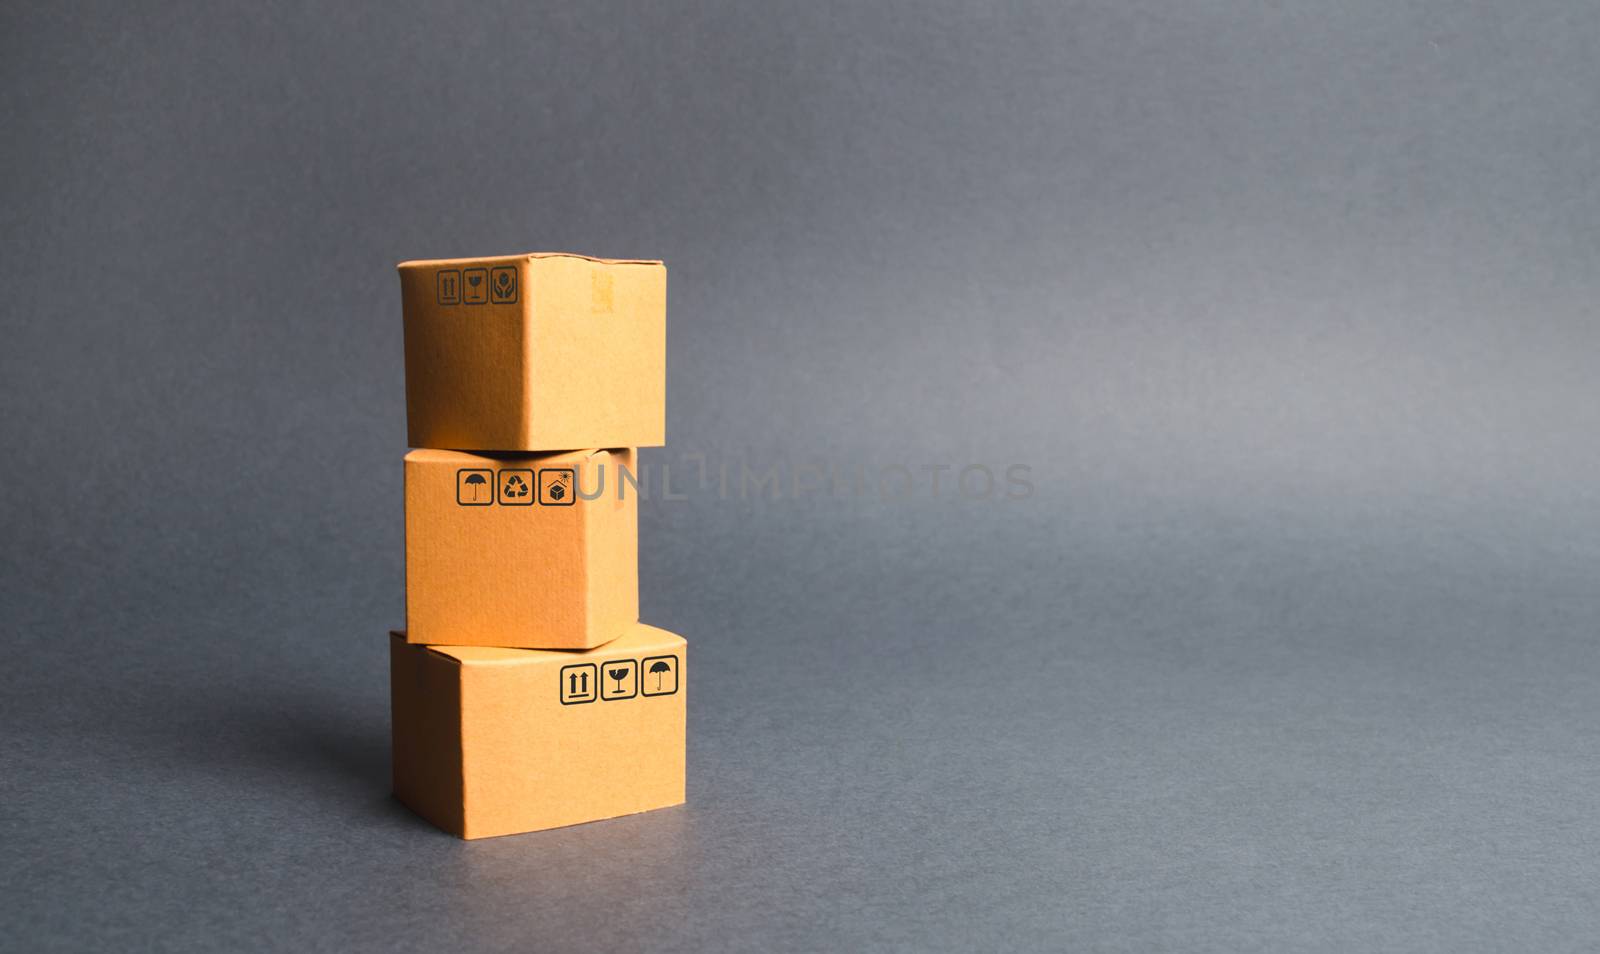 A bunch of three cardboard boxes. The concept of products and goods, commerce and retail. E-commerce, sales and sale of goods through online trading platform. Import and export of products by iLixe48